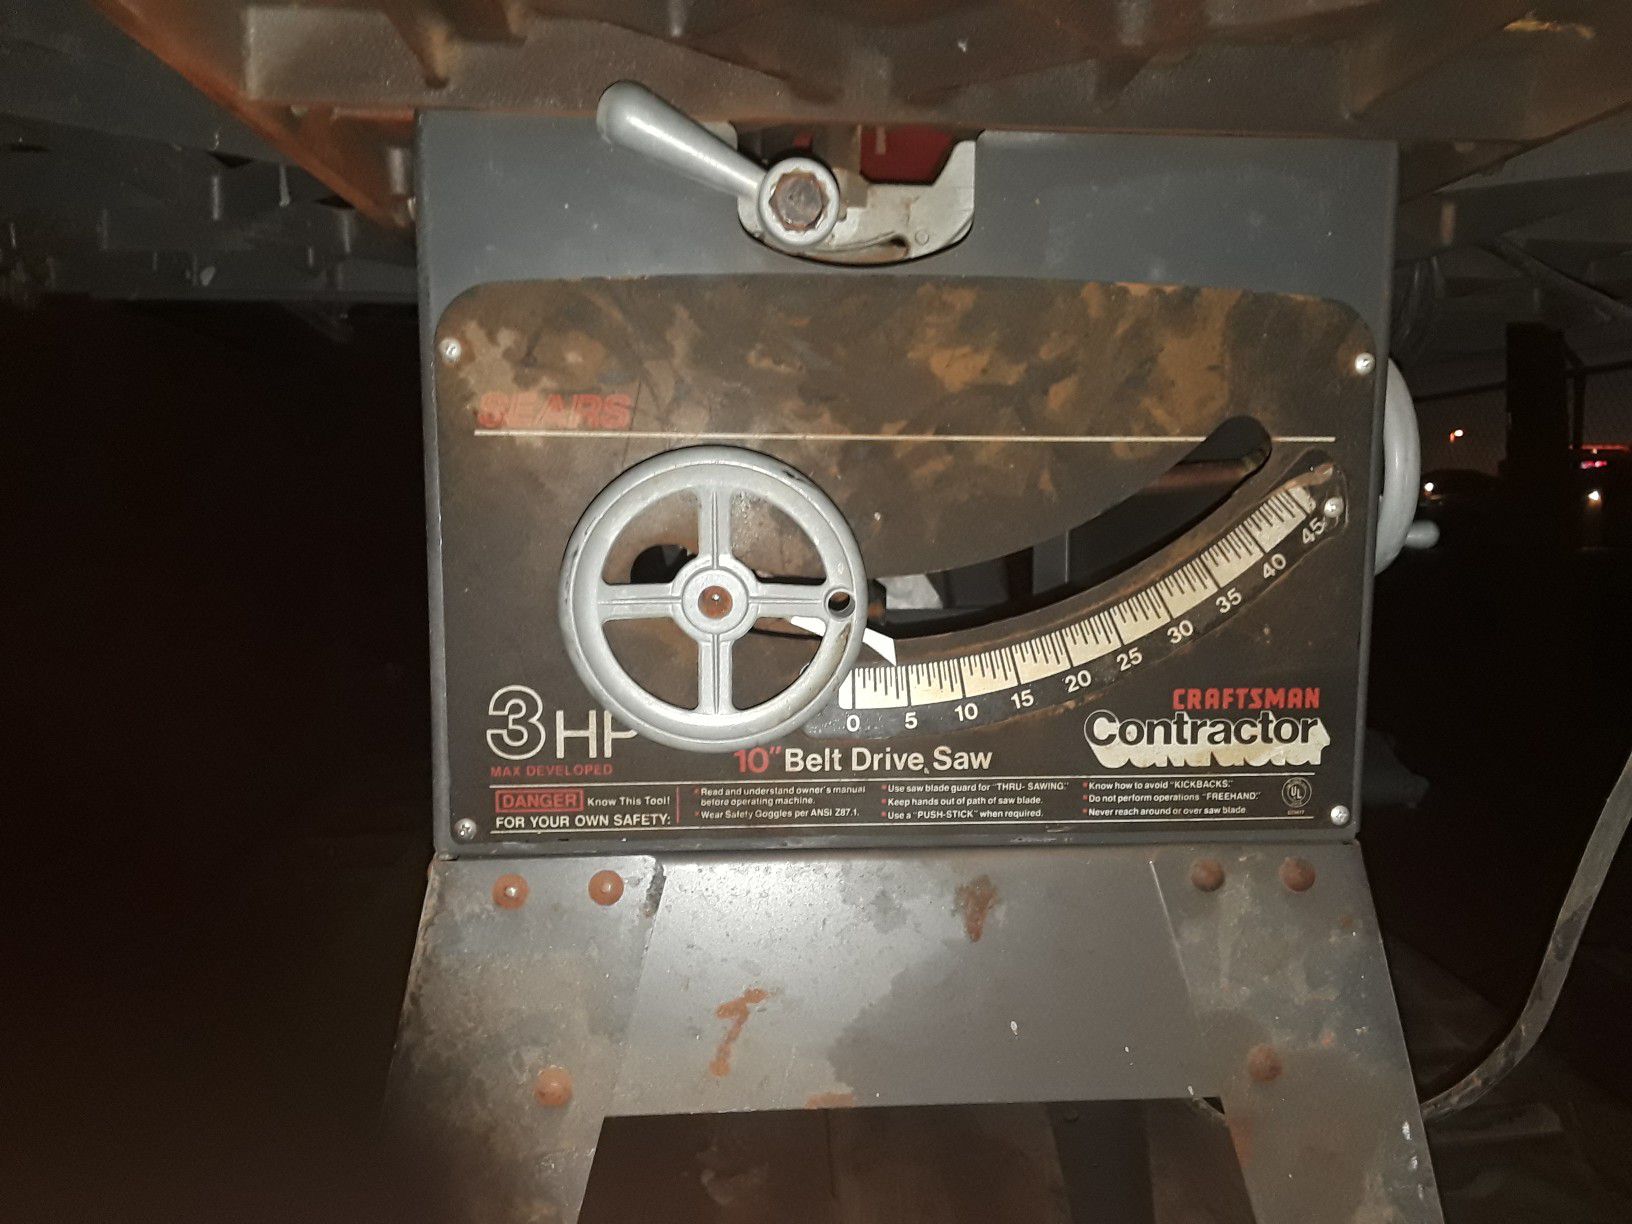 Craftsman "contractor" table saw